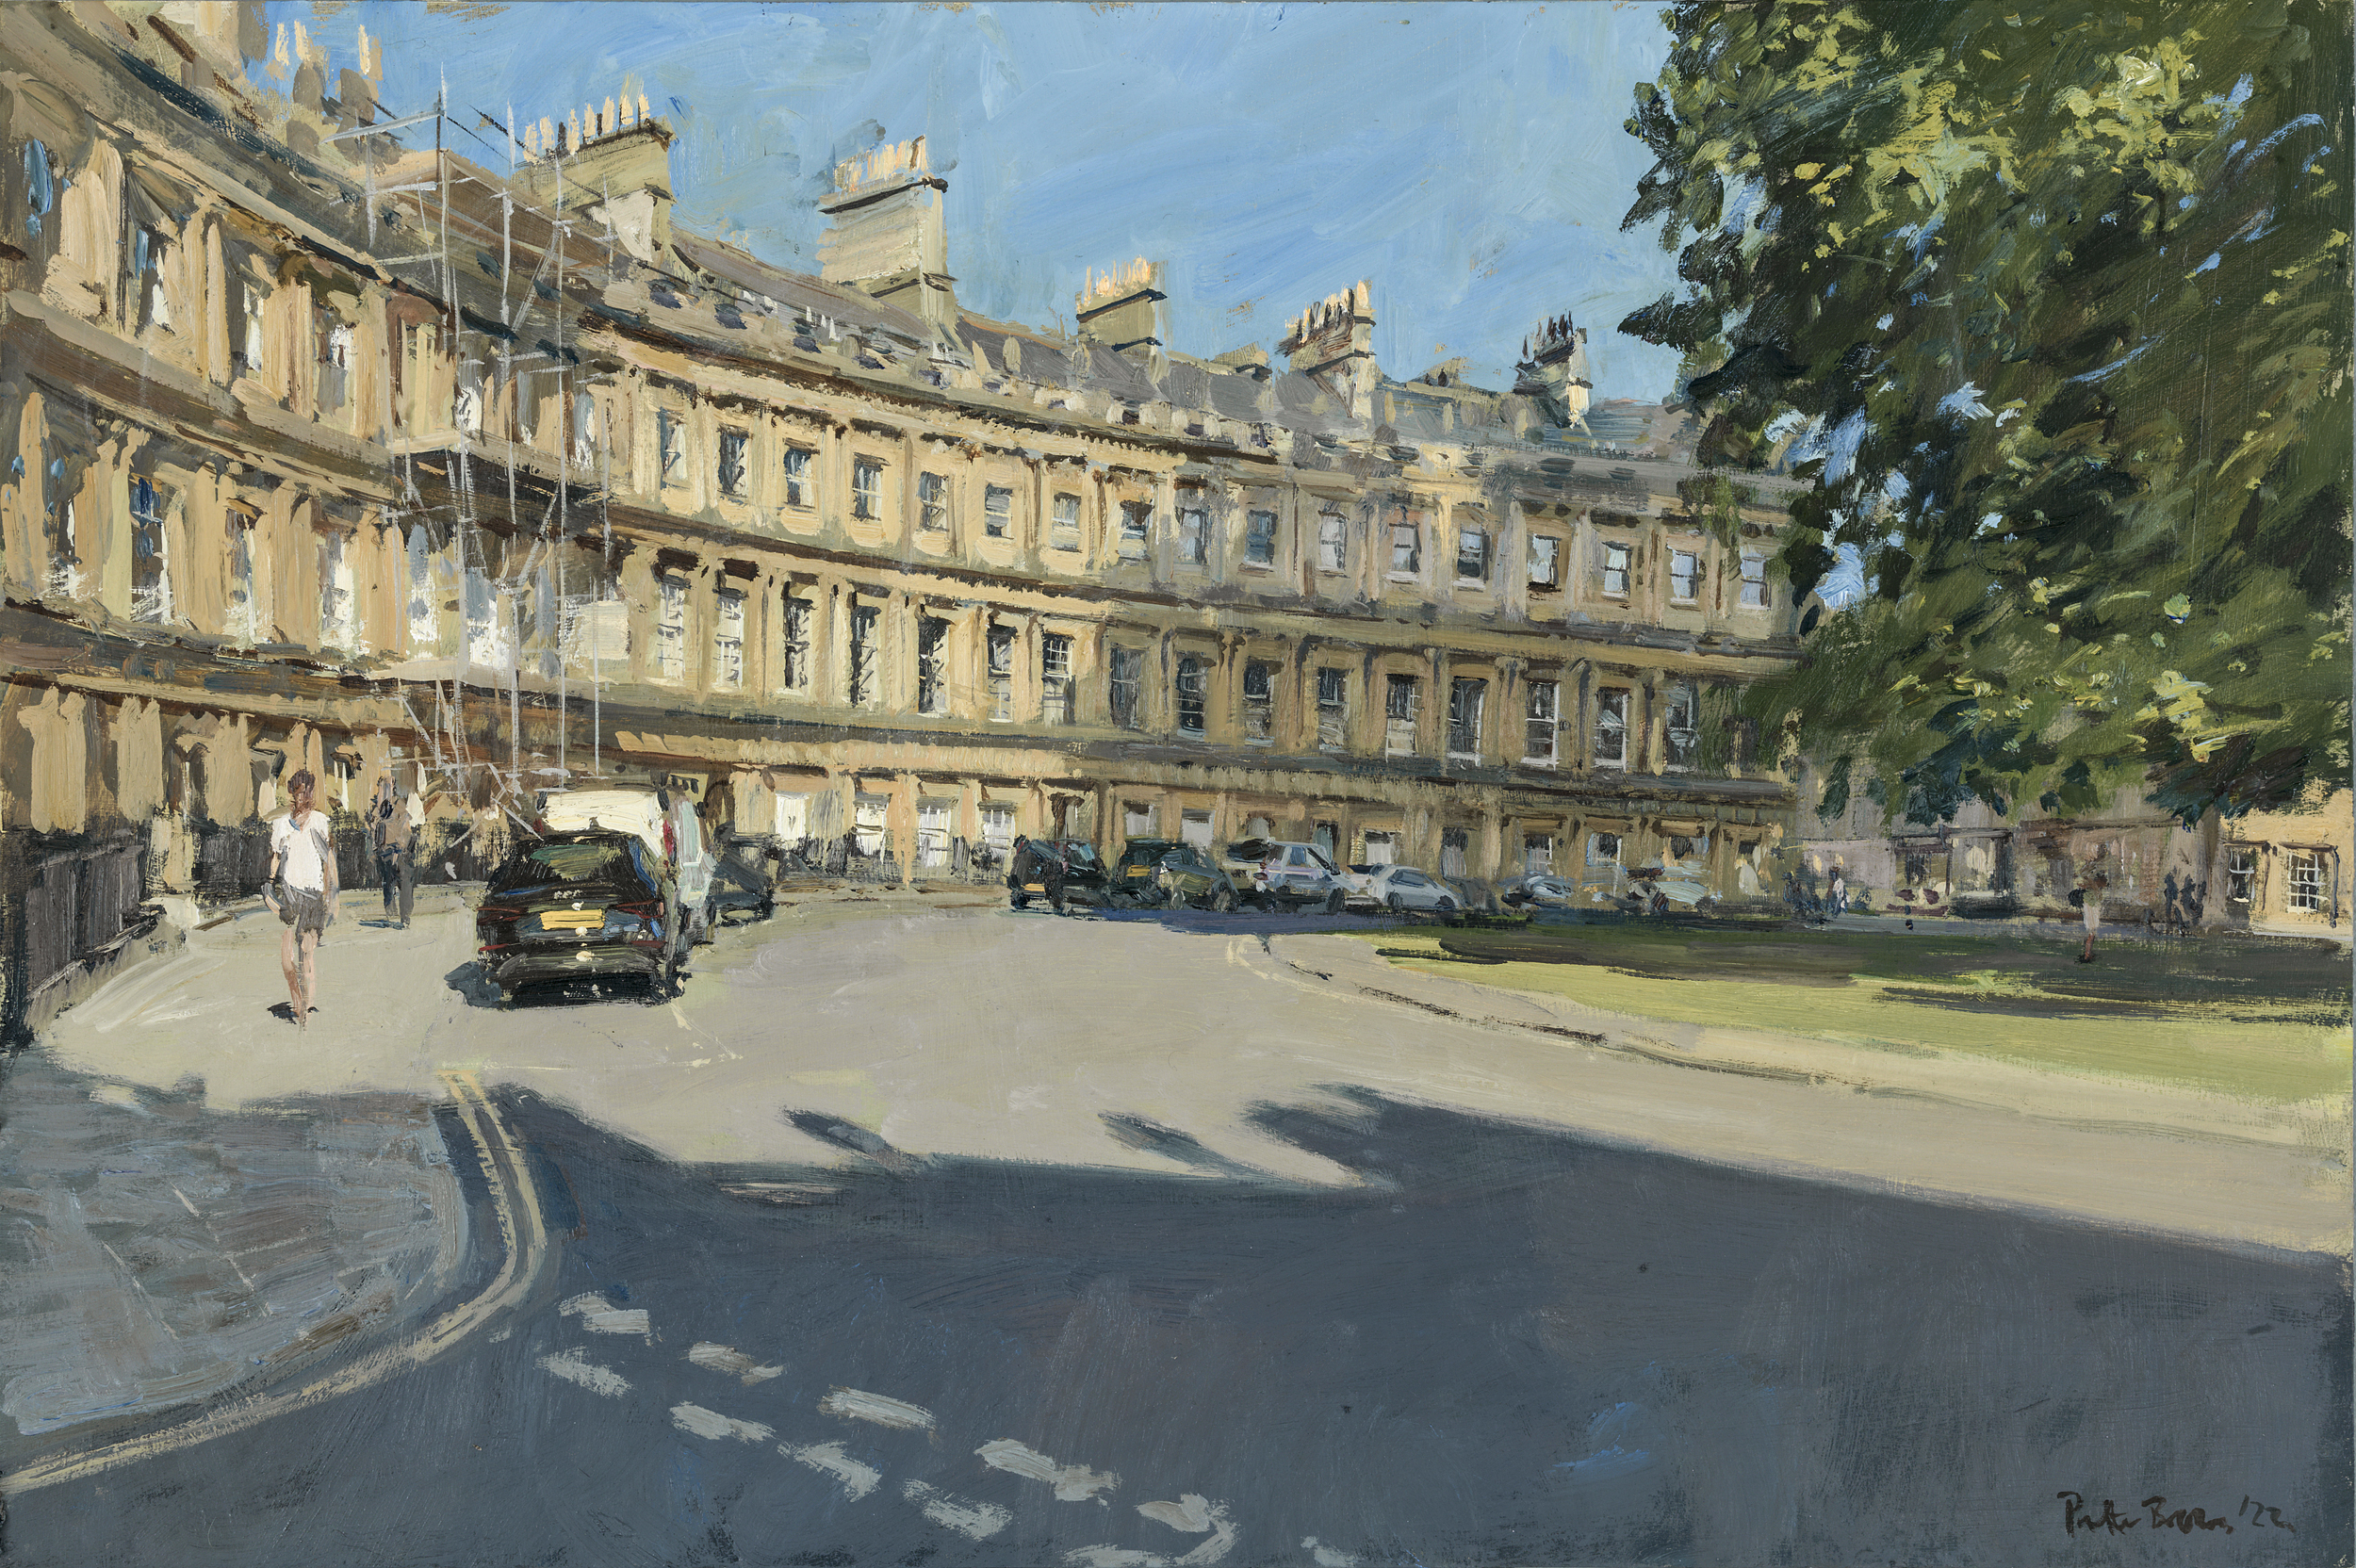 Peter Brown, The Circus, Bath early summer morning 2022